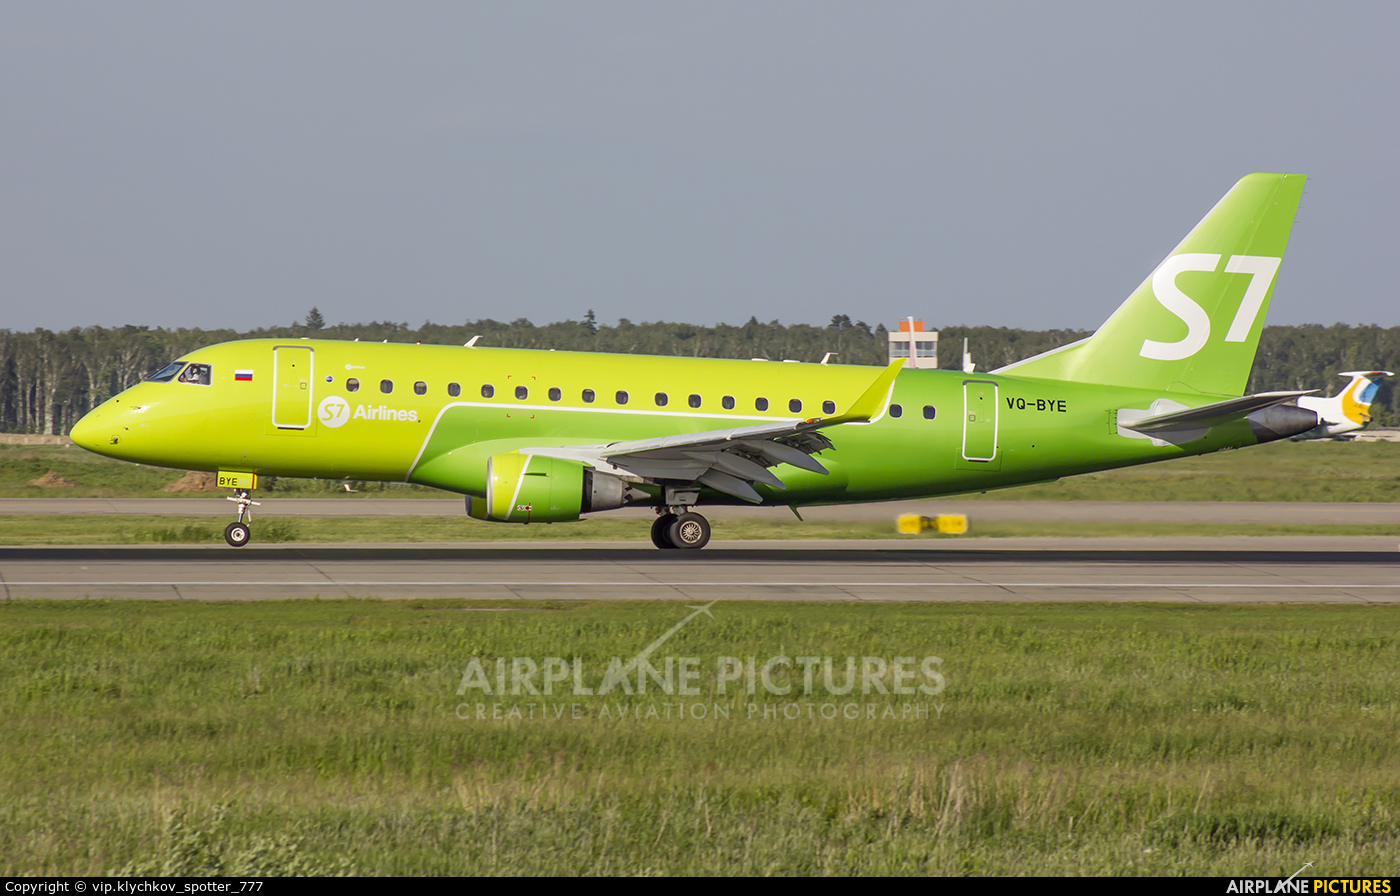 S7 Airlines VQ-BYE aircraft at Moscow - Domodedovo